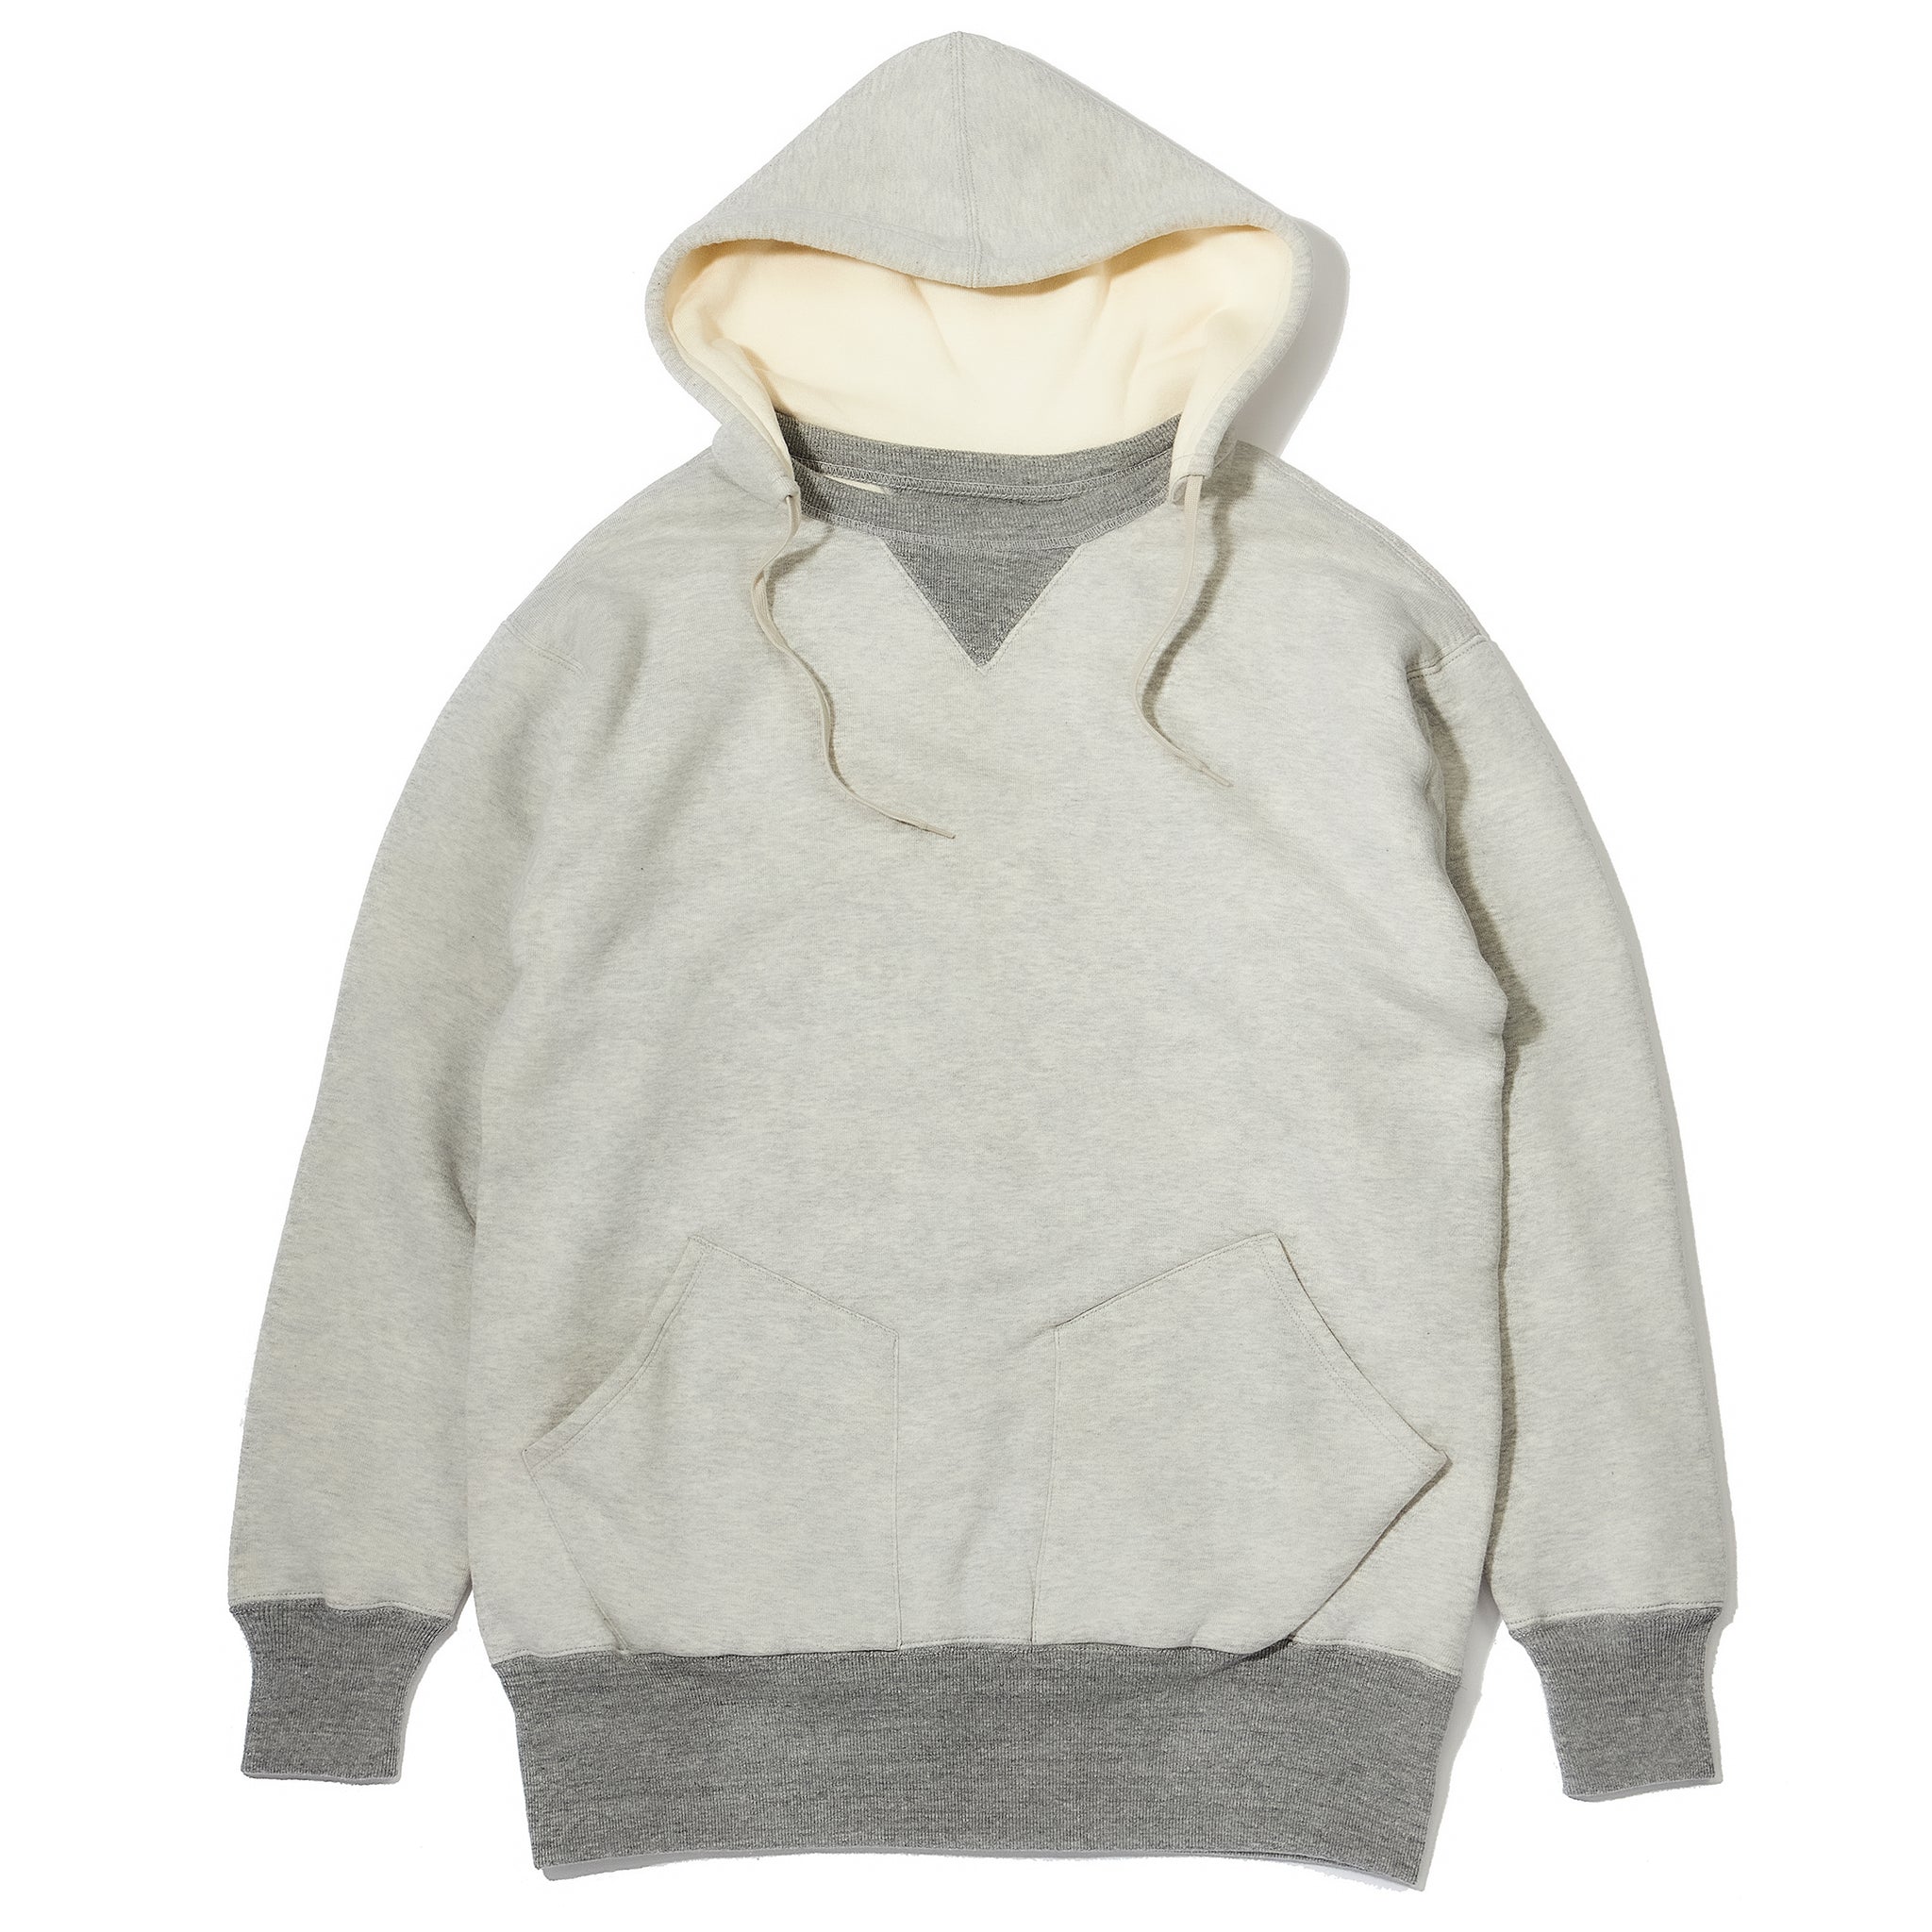 DOUBLE-FACE HOODED SWEATSHIRT – The Real McCoy's